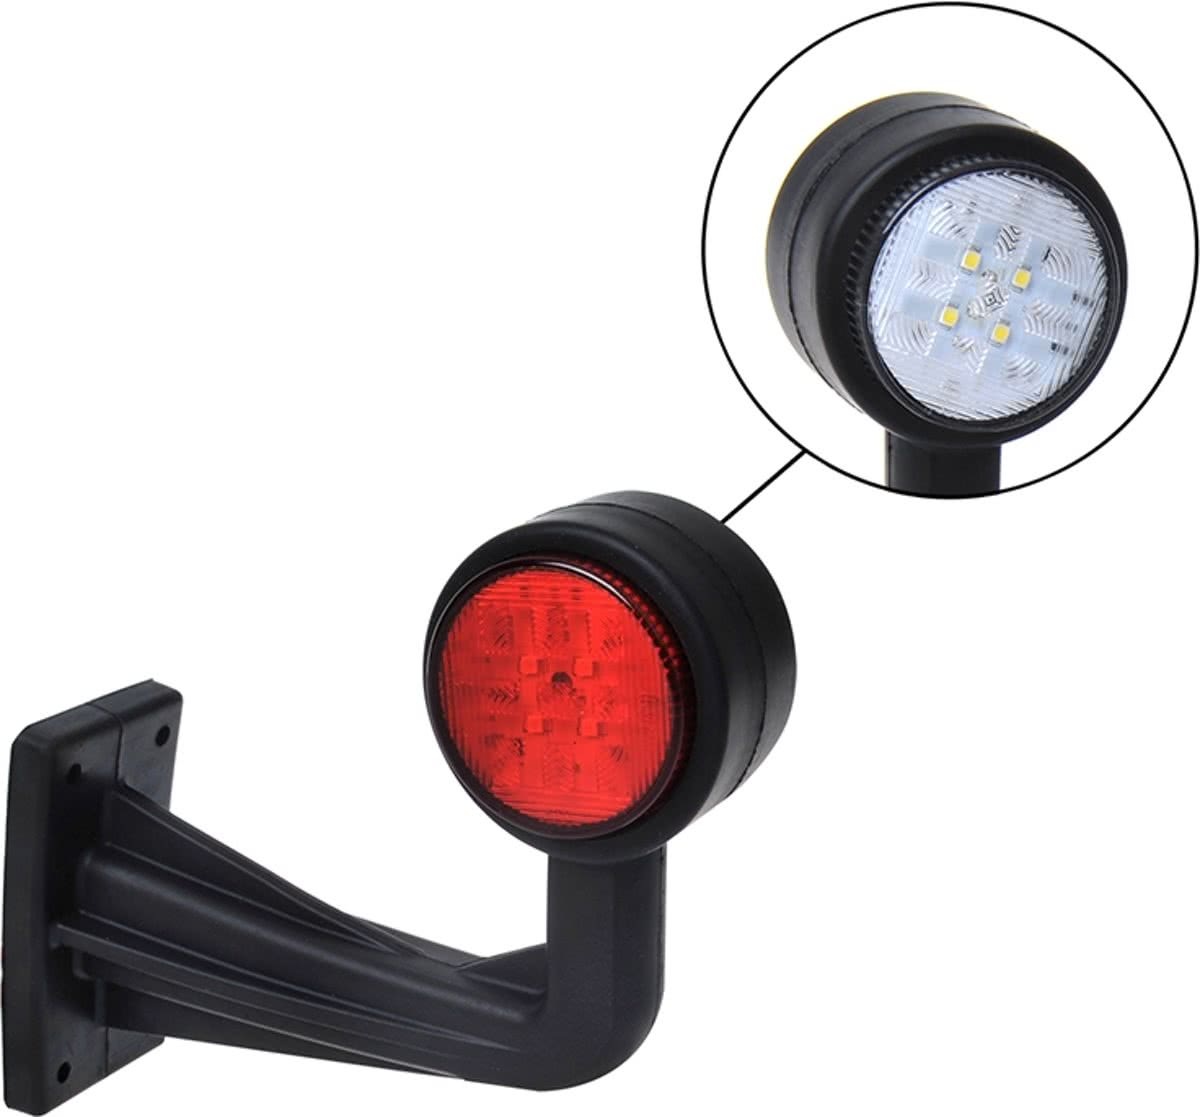 Ford, A. Breedtelicht rood/wit 160mm 8LED haaks